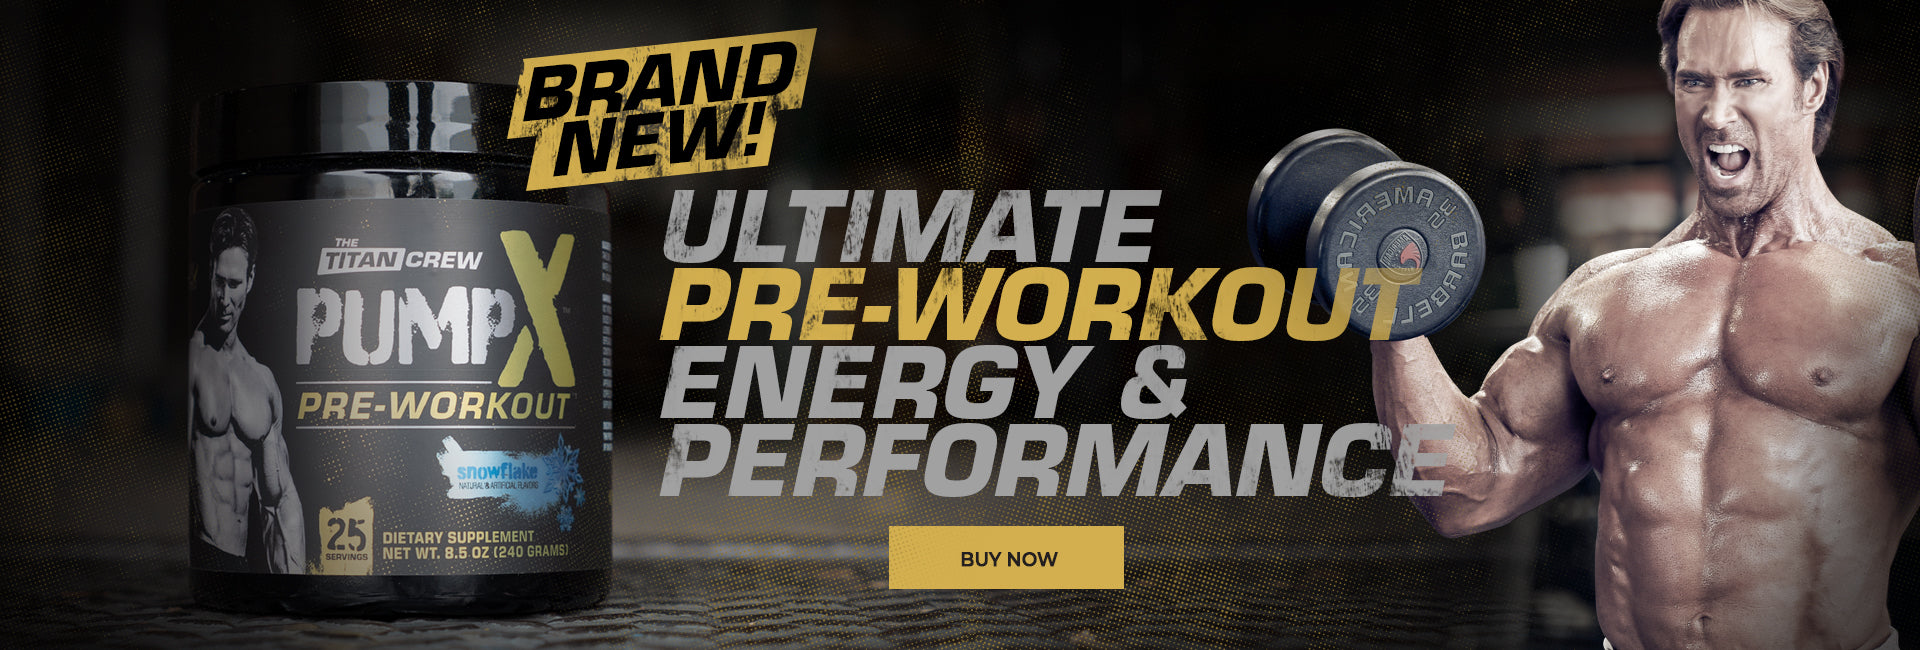 Brand New! Mike O'Hearn's Pump X. Ultimate Pre-Workout Energy & Performance. Shop Now